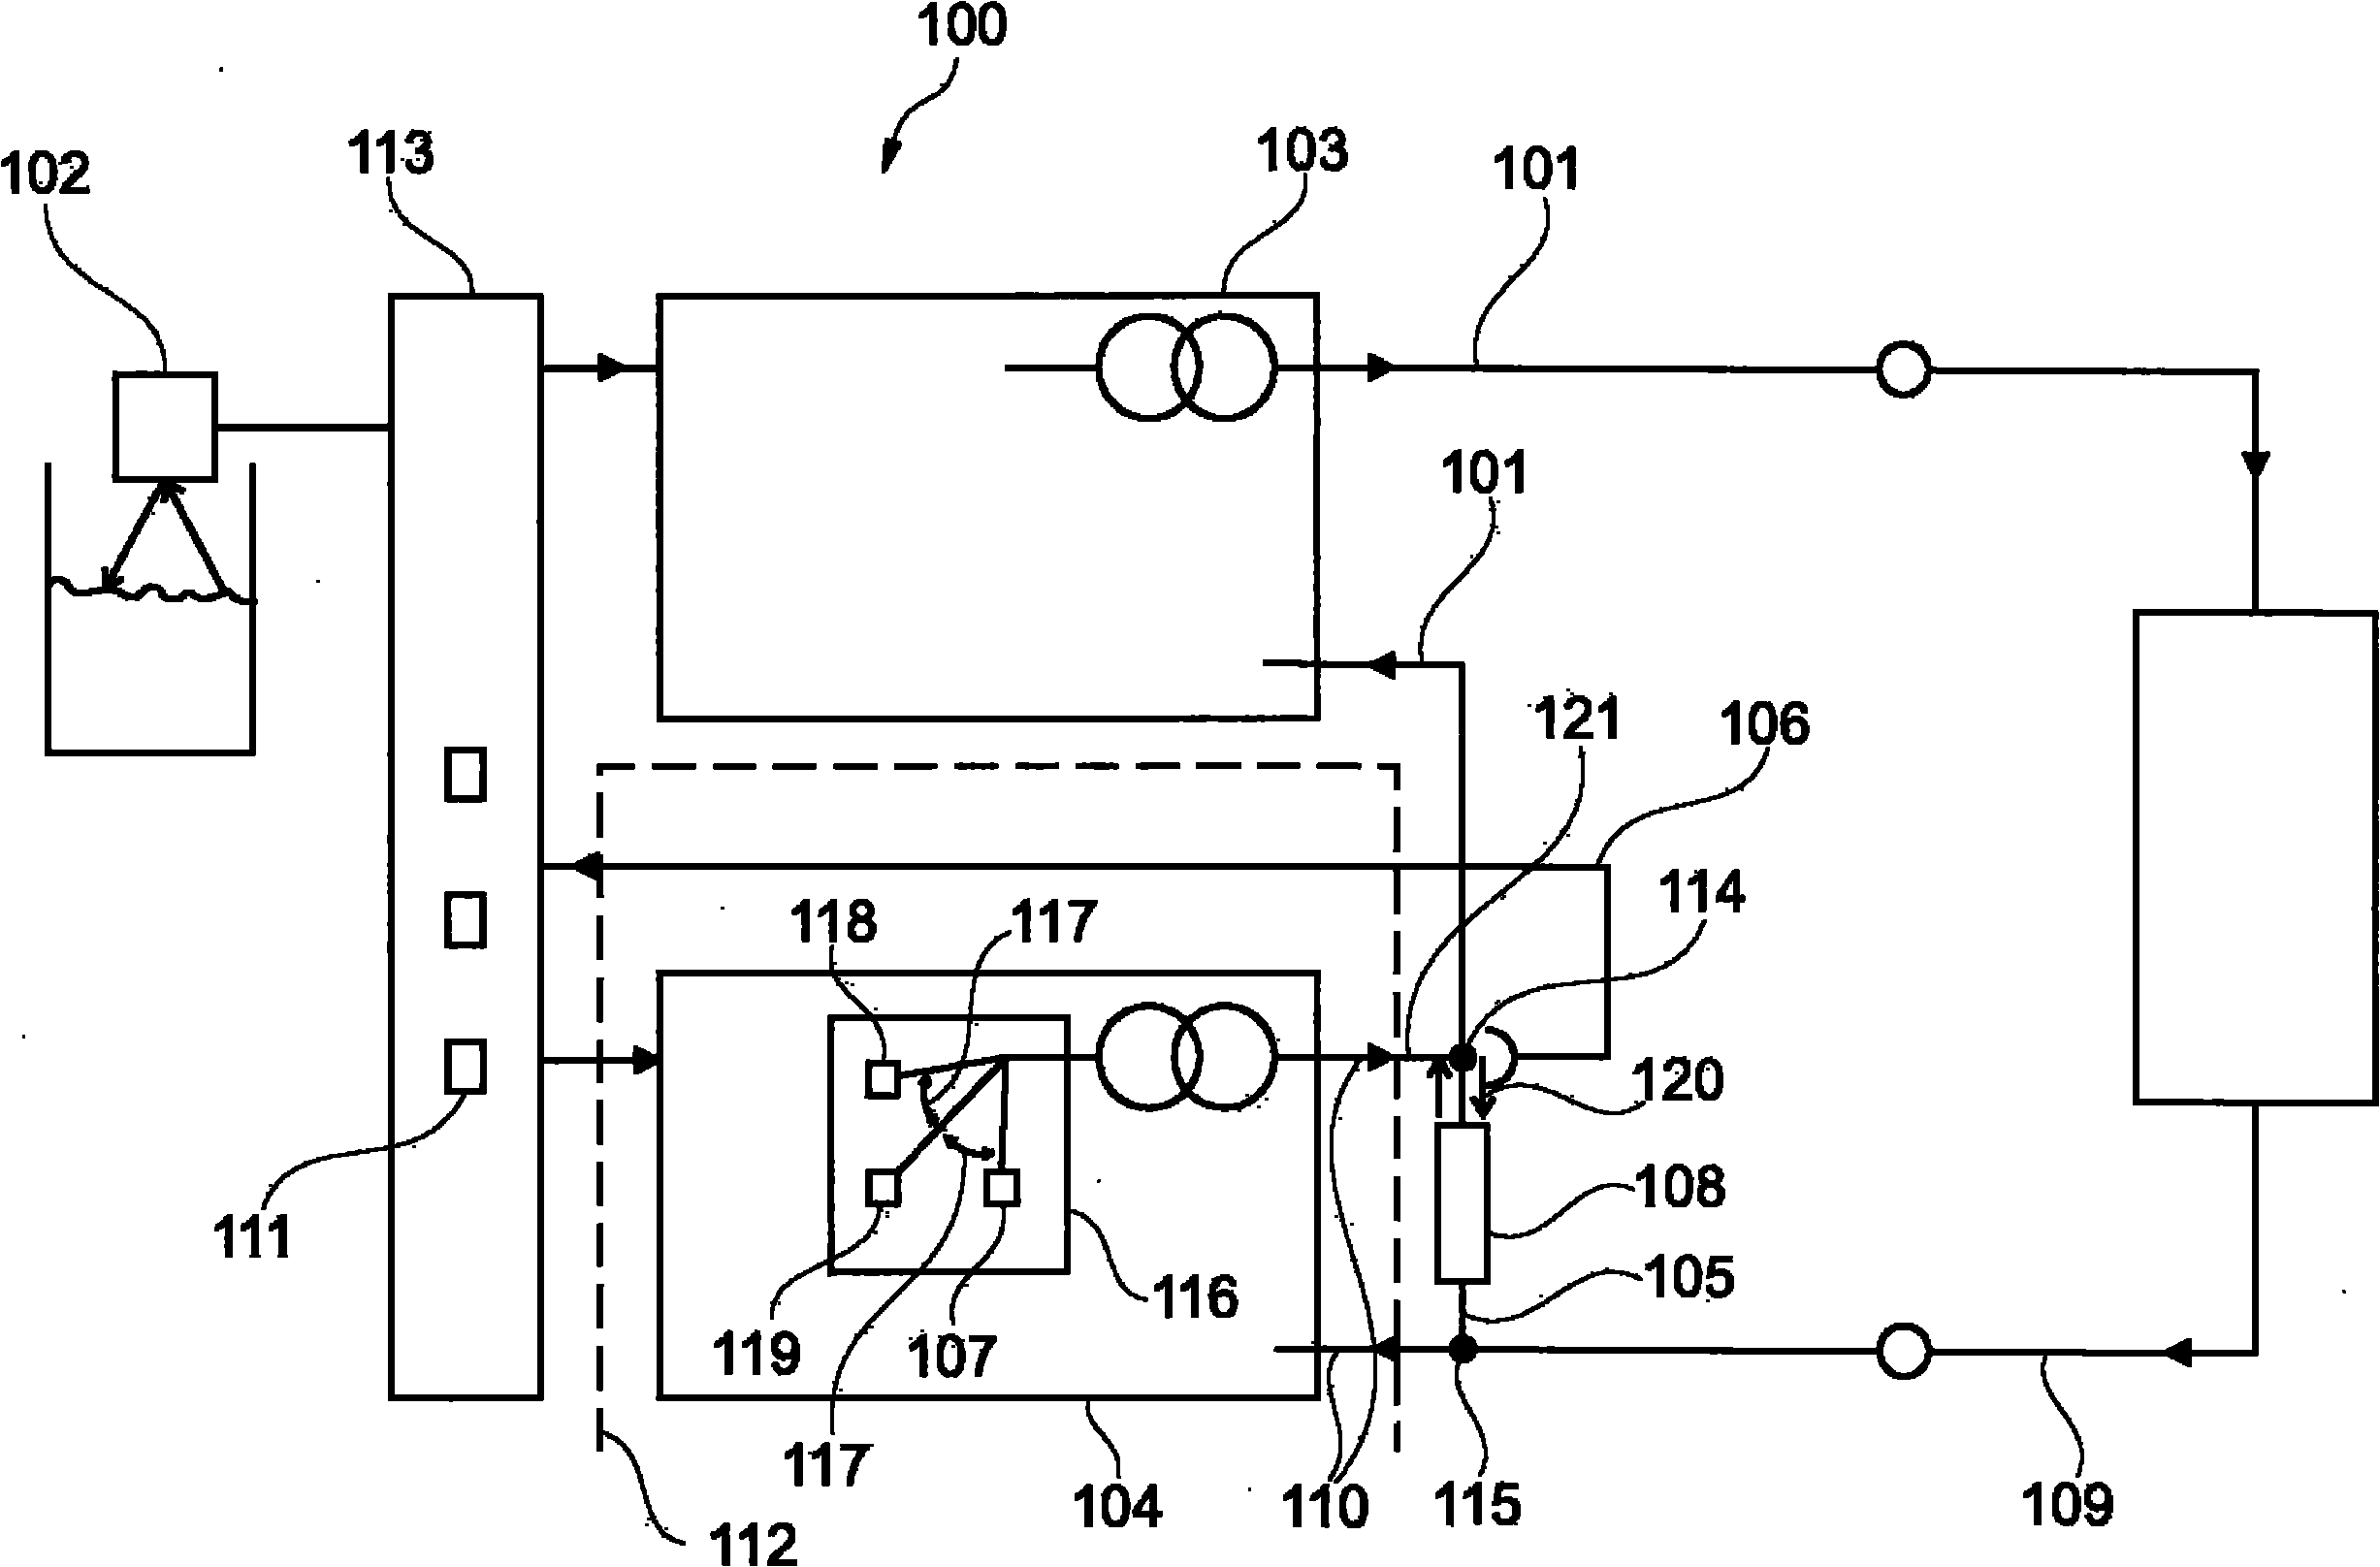 Energy production device for producing and simultaneously monitoring measured current